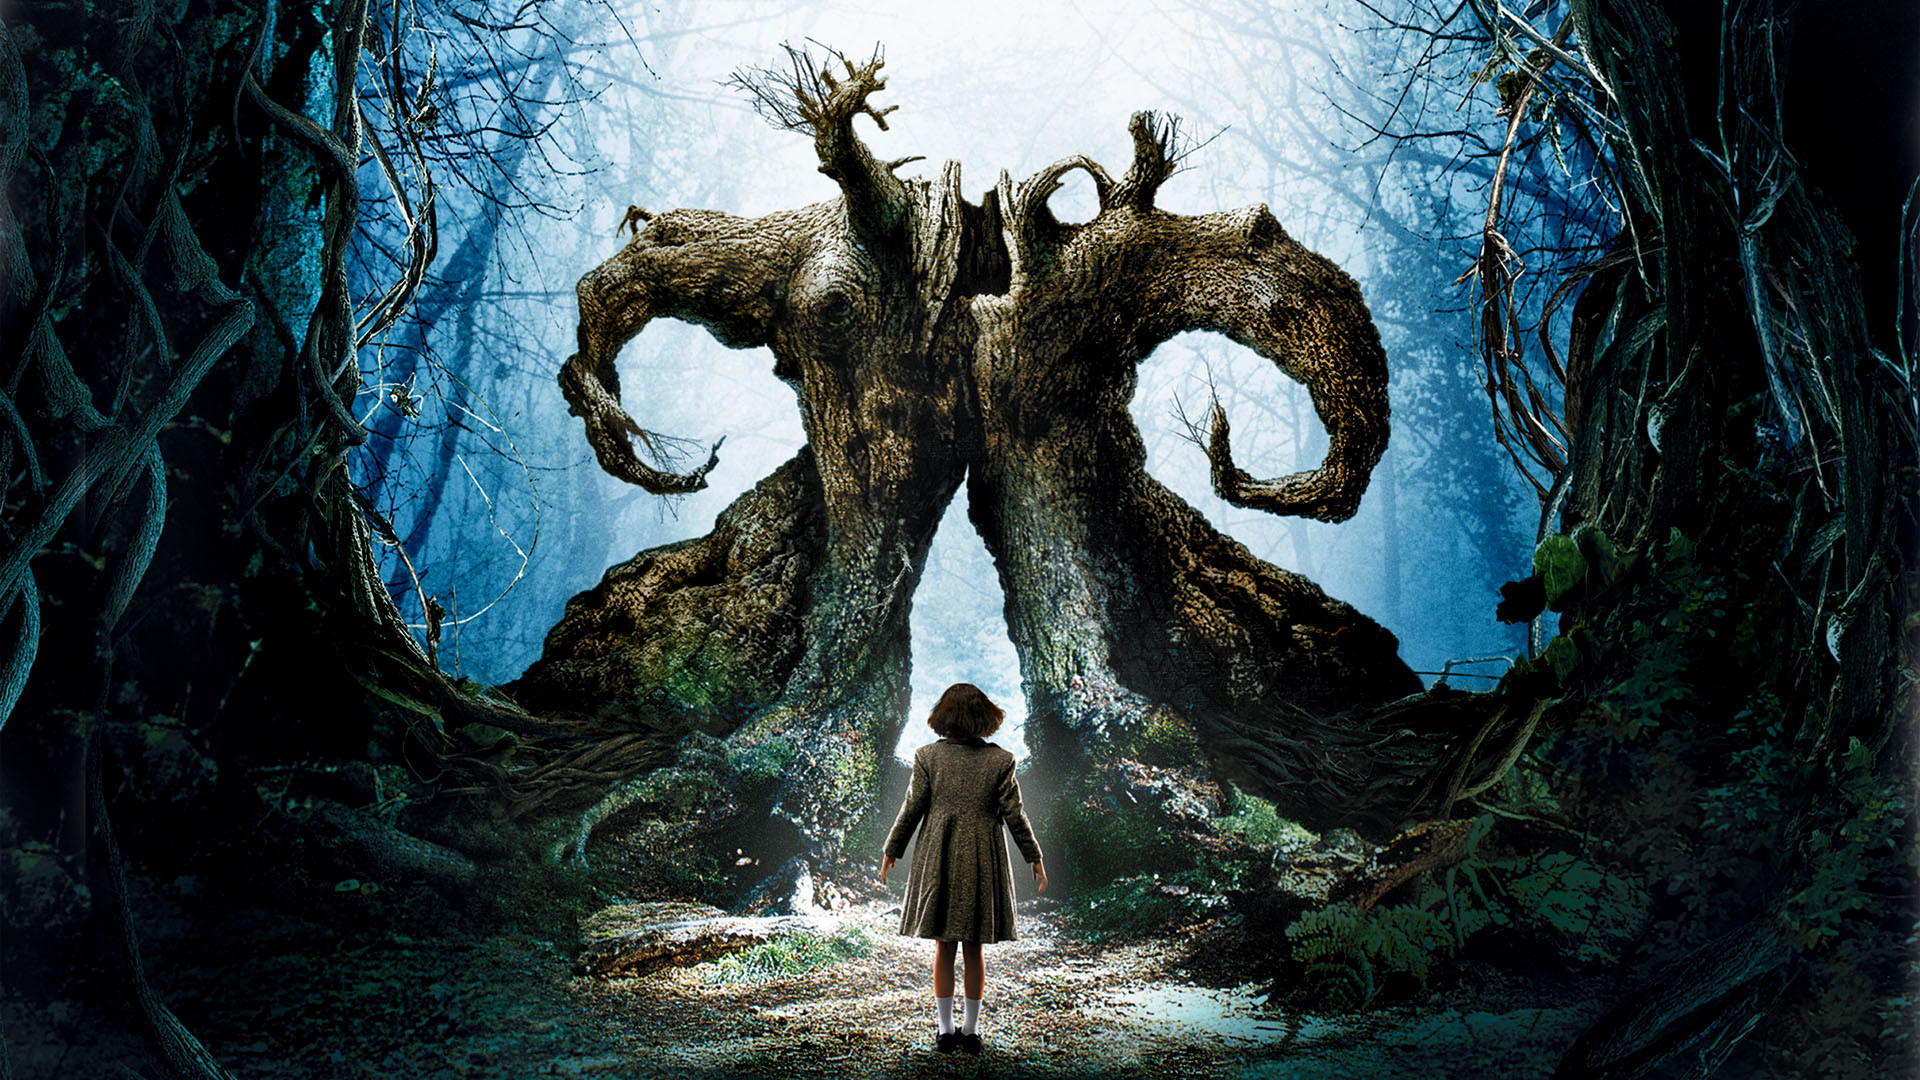 Movie Pan's Labyrinth HD Wallpaper | Background Image